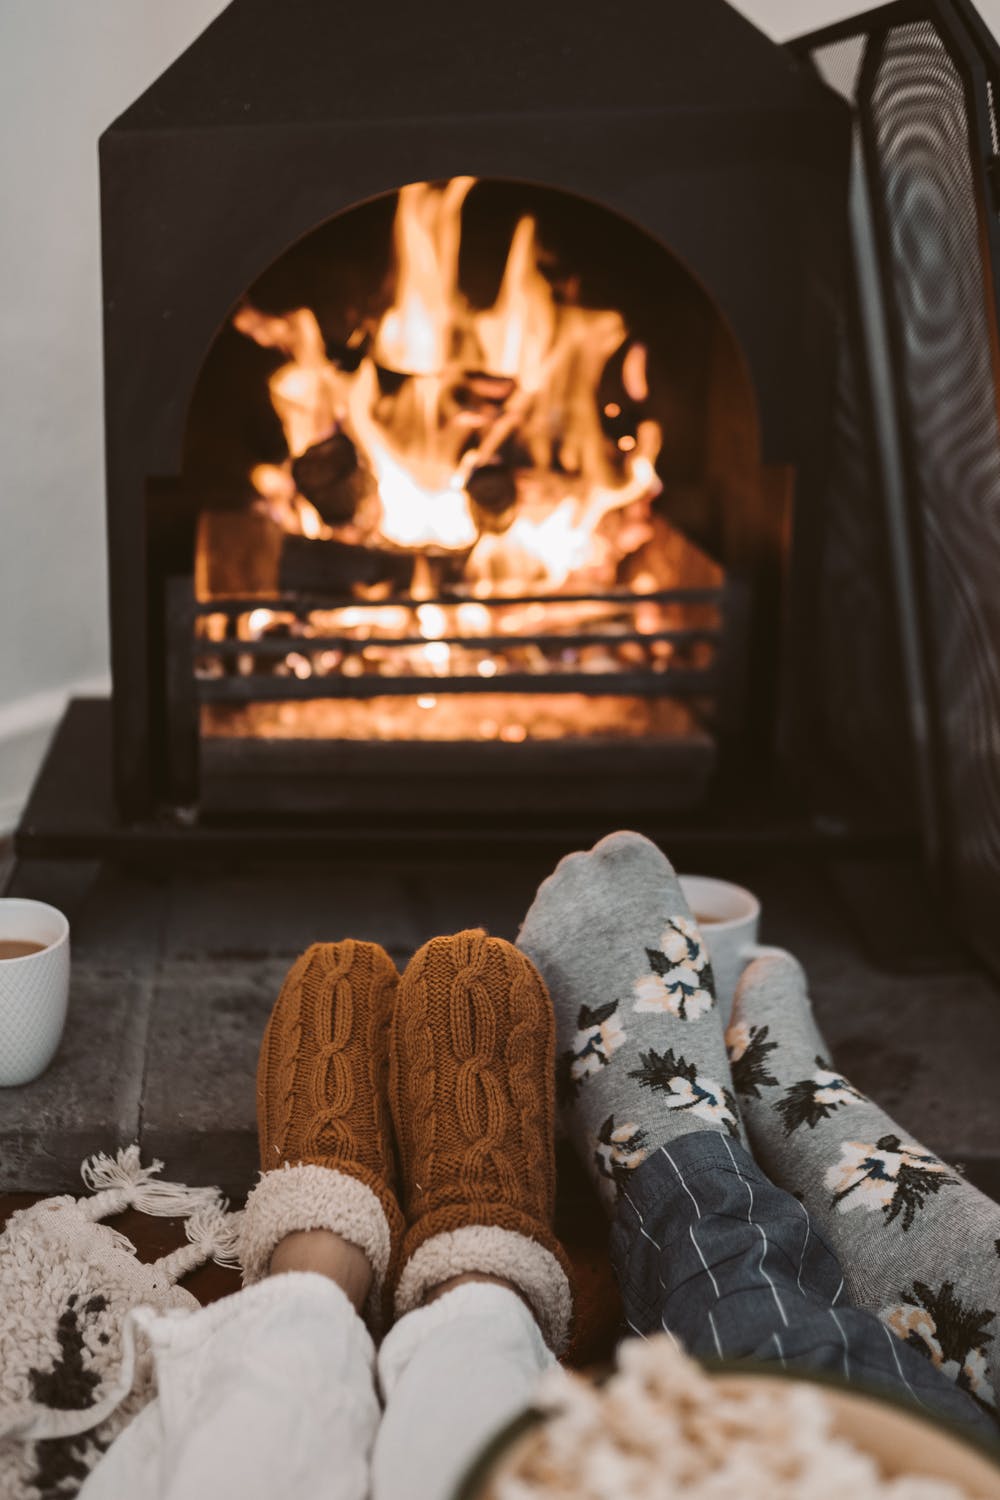 a person's feet in front of a fireplace